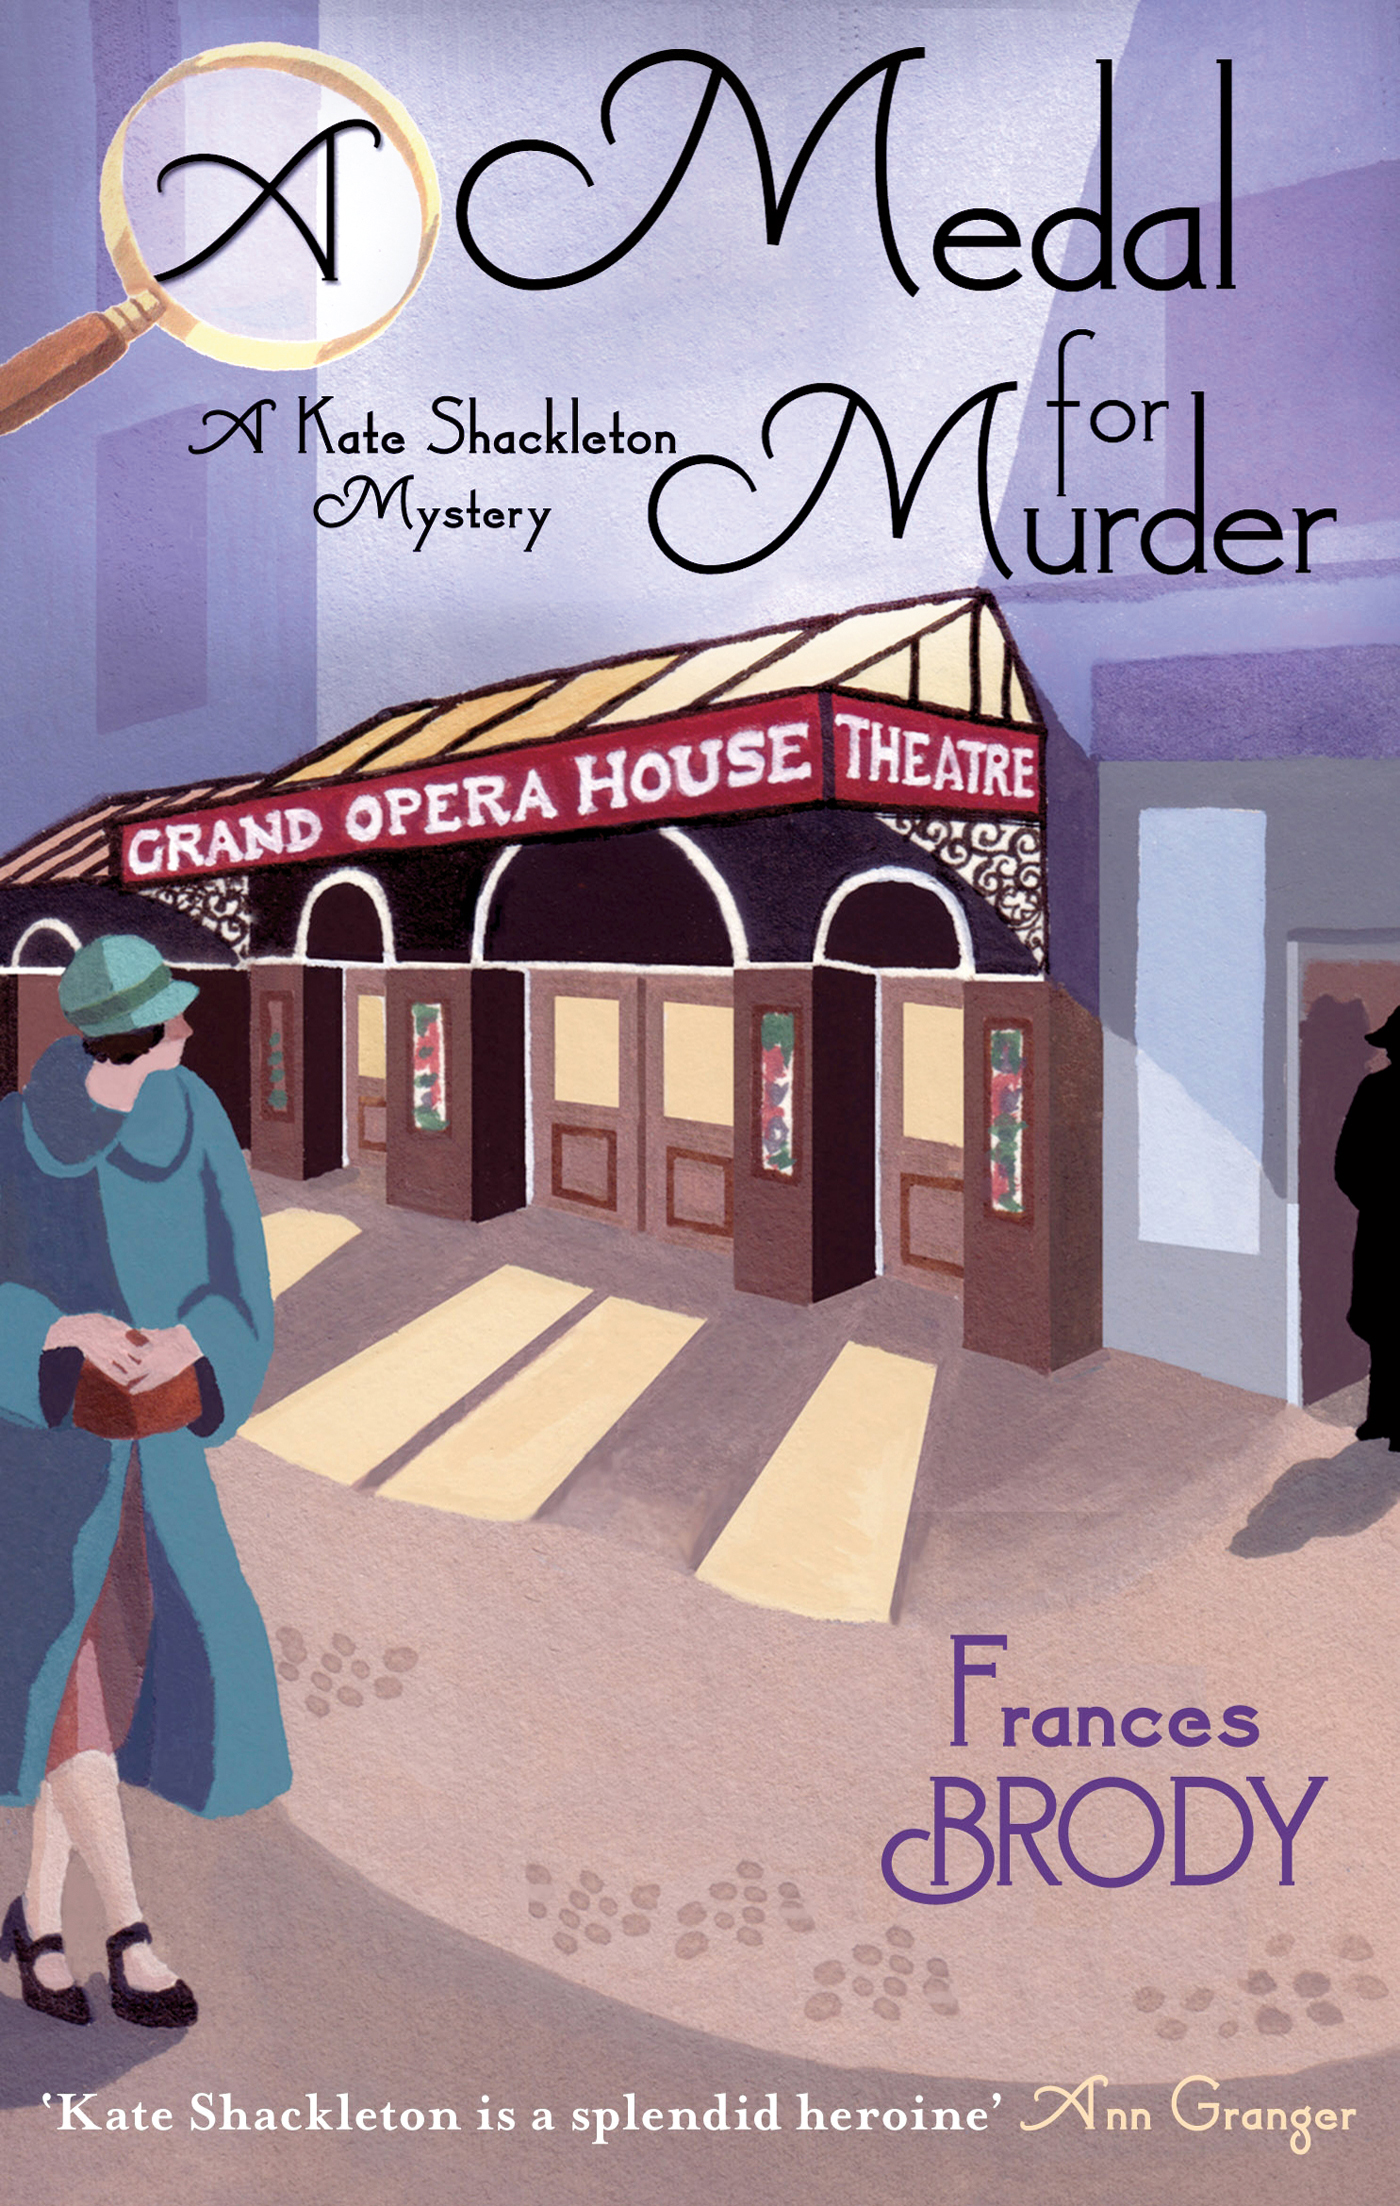 A Medal for Murder: A Kate Shackleton Mystery